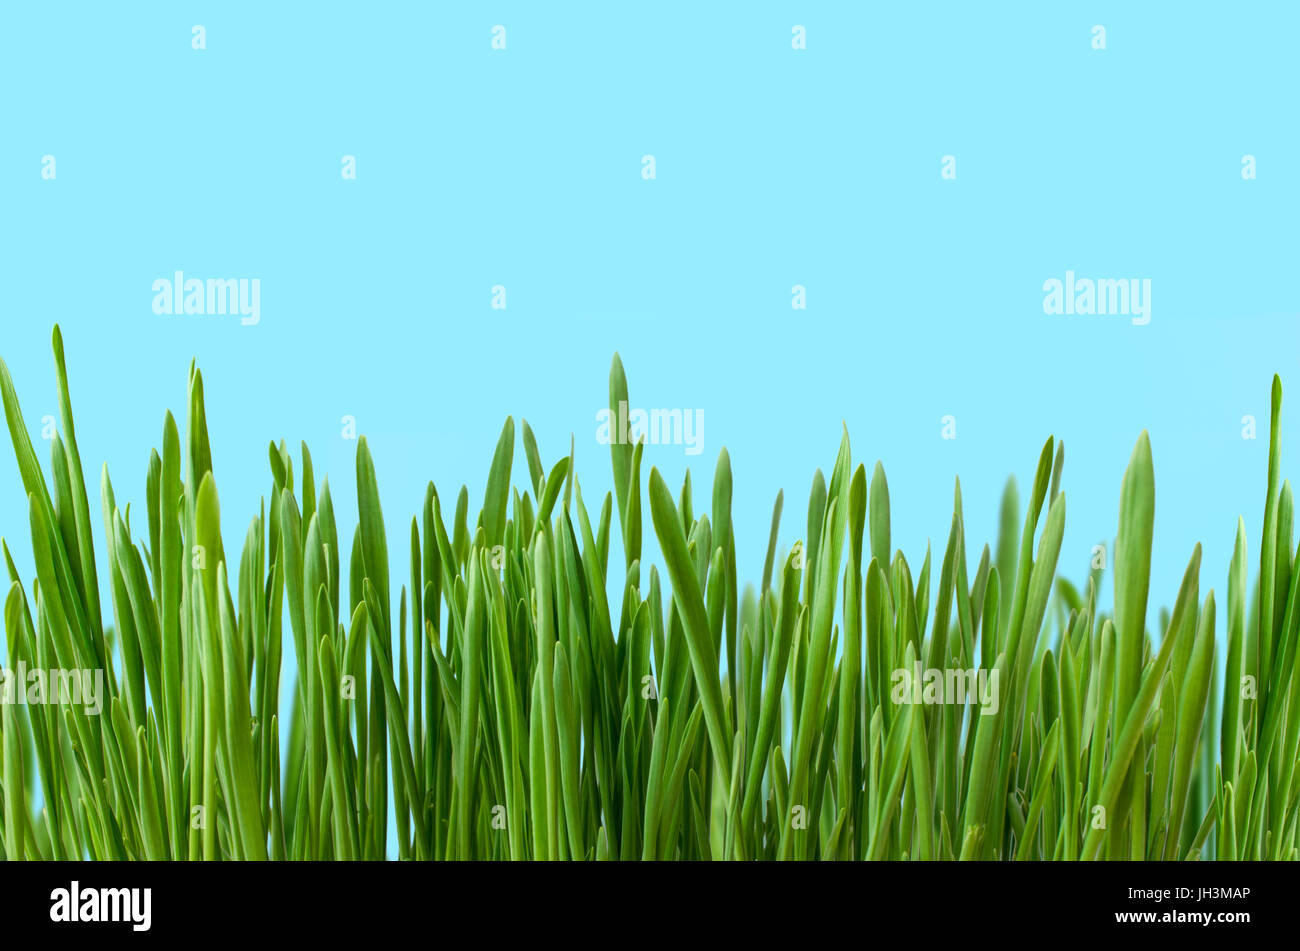 Row of blades of grass, growing upright against blue background to represent land and sky.  Copy space above. Stock Photo